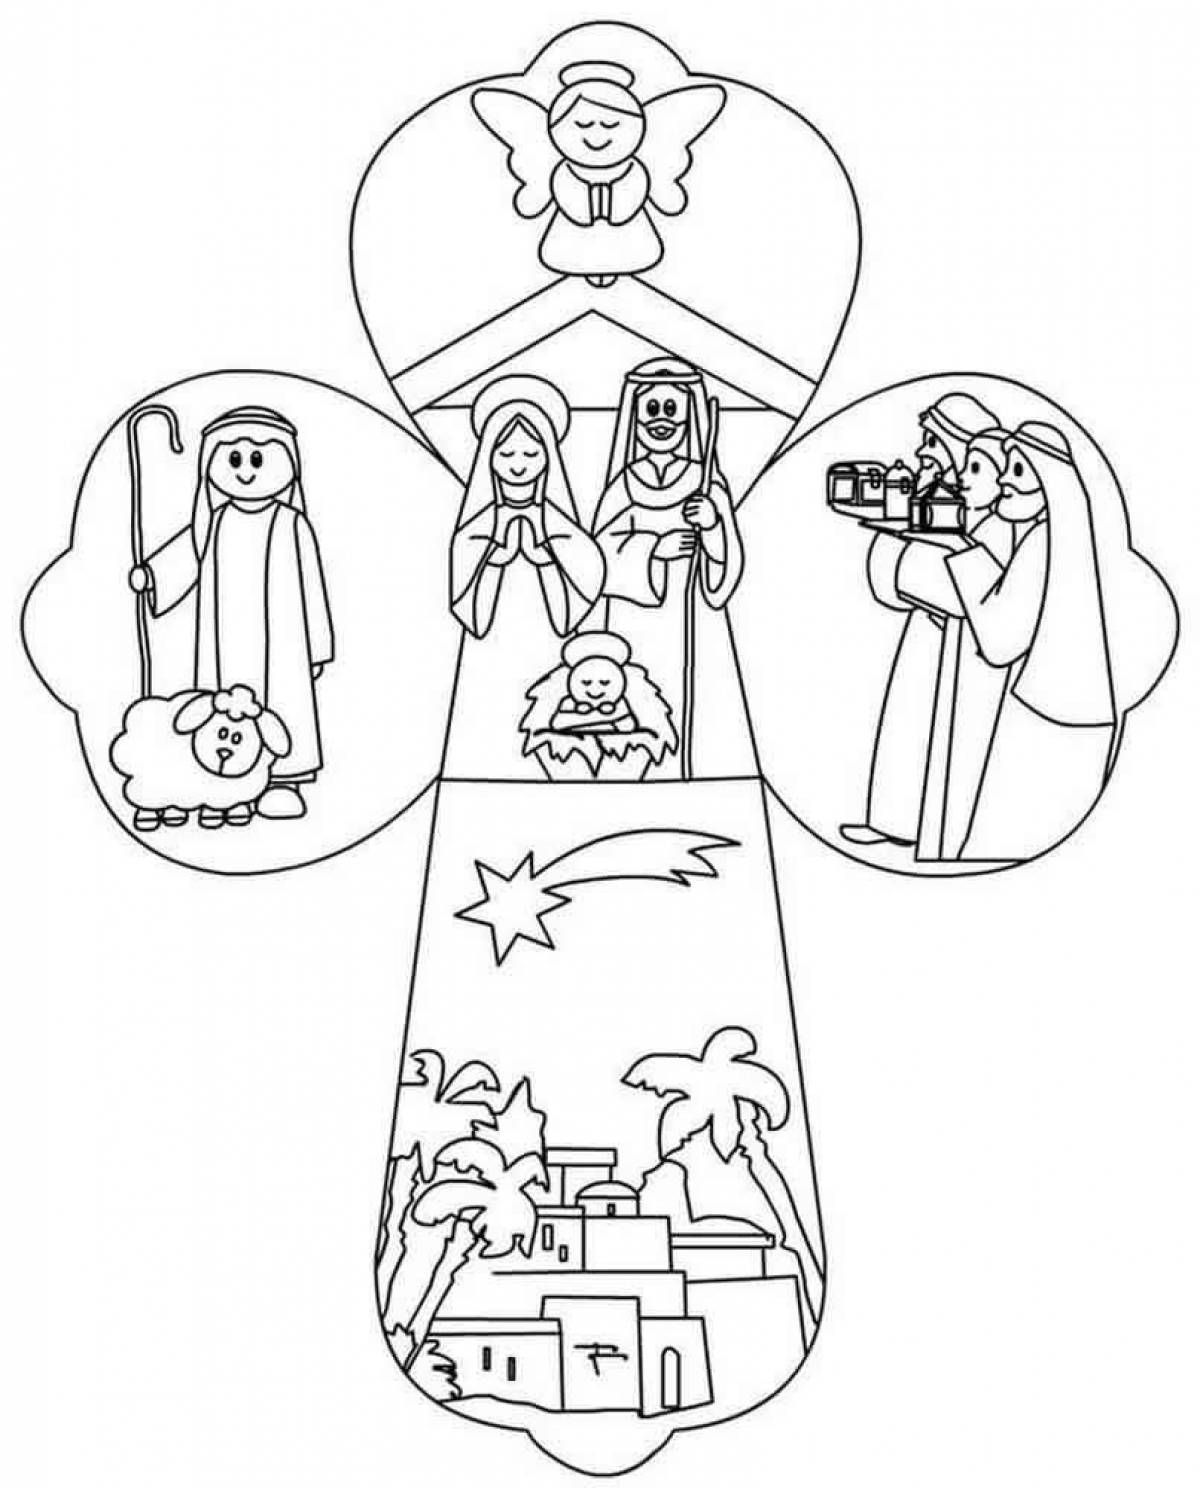 Exalted coloring page christmas for Sunday school kids